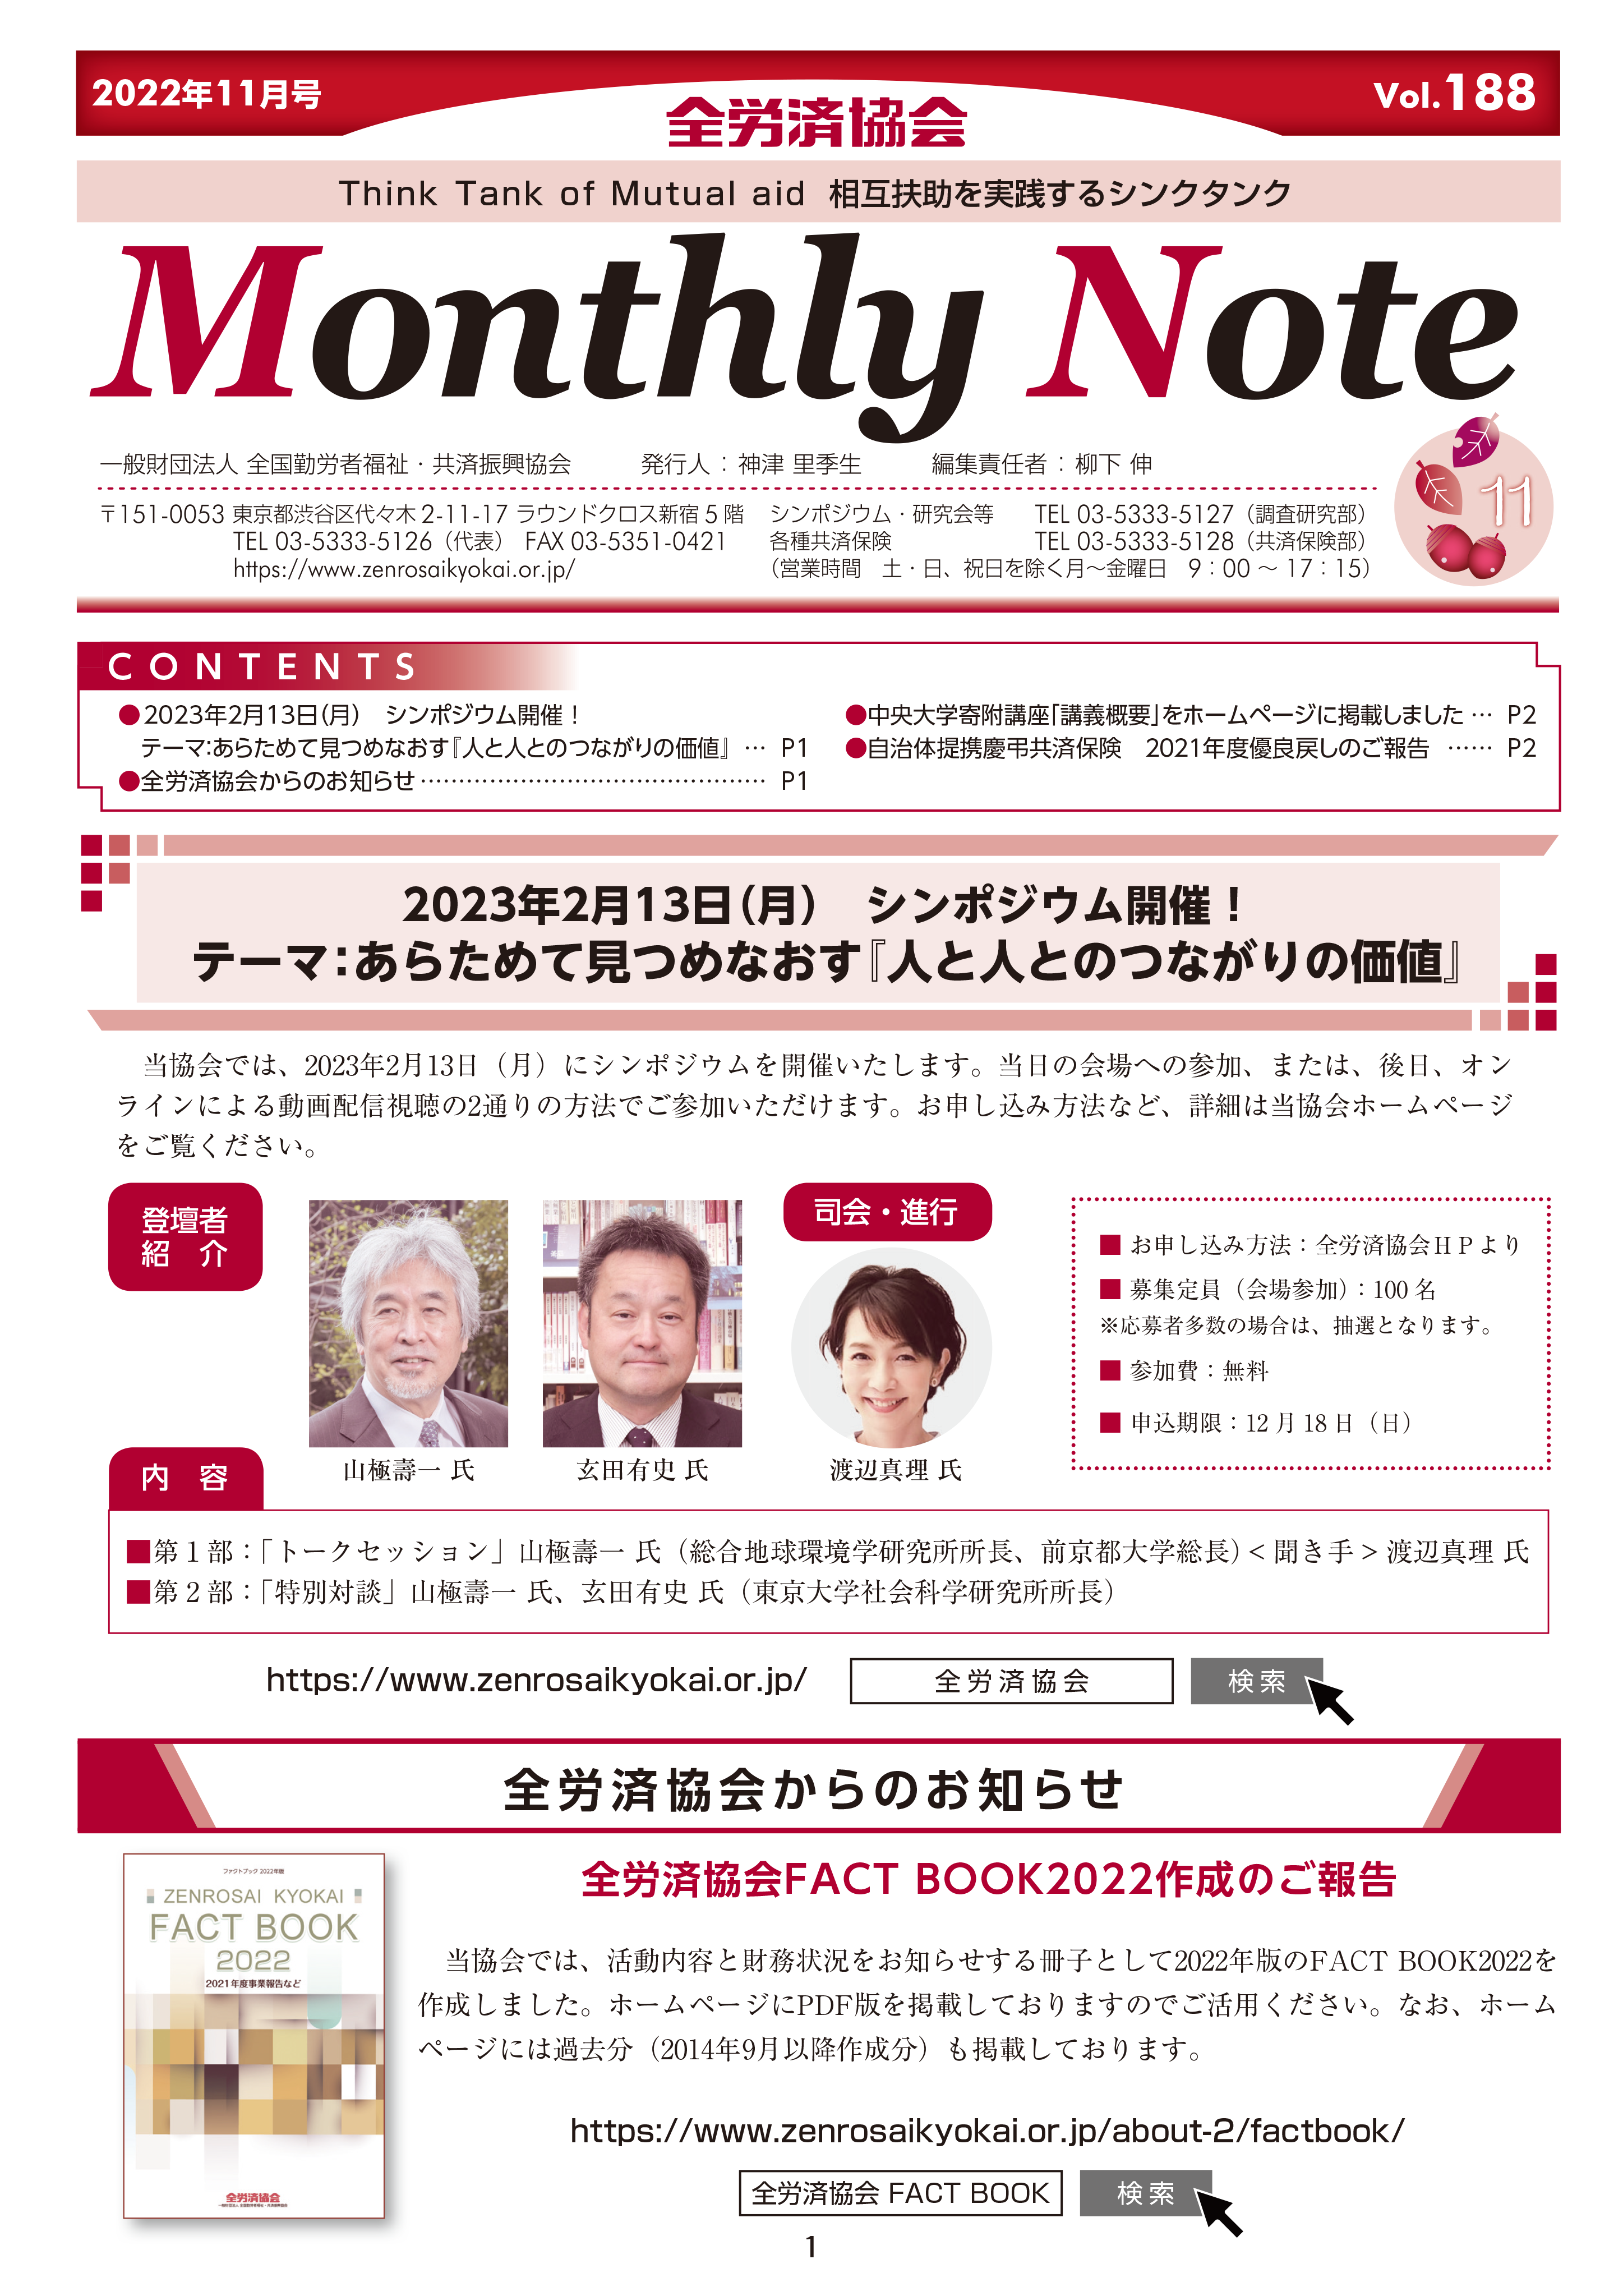 Monthly Note 第188号（2022年11月号）